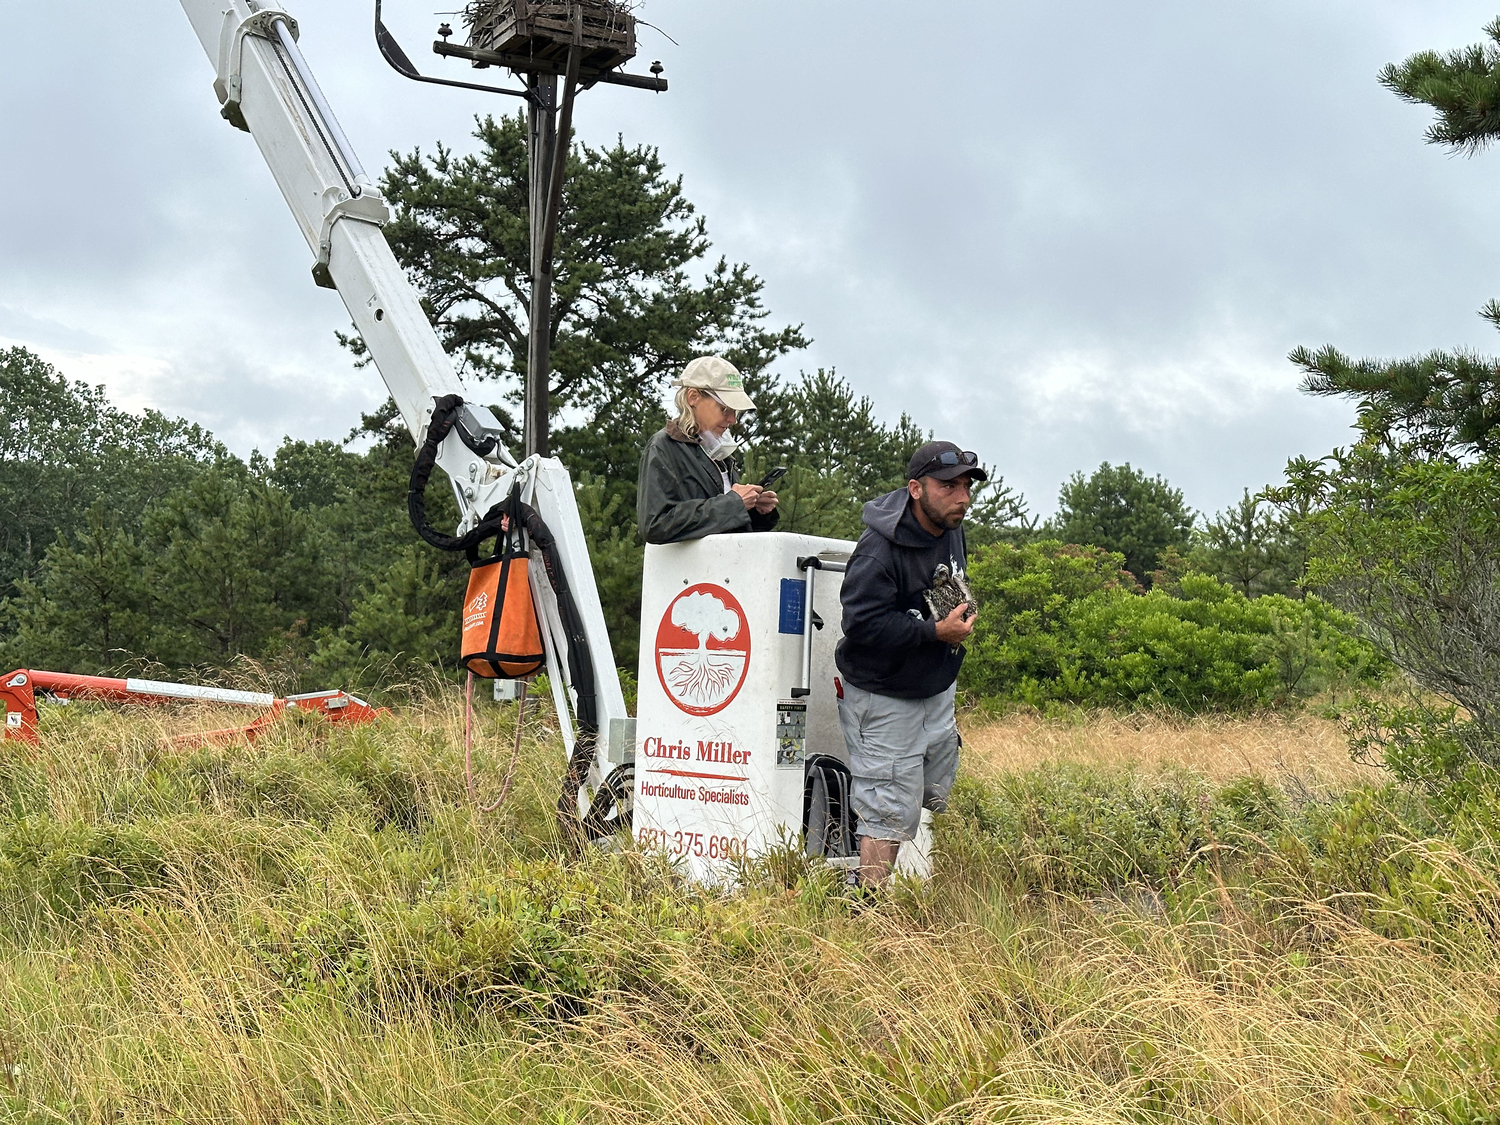 Missy Hargraves of the Evelyn Alexander Wildlife Rescue Center and Joe Rocco of the Broken Antler Wildlife Search and Rescue rescue an injured osprey chick from its nest at The Bridge Golf Club on Sunday morning.